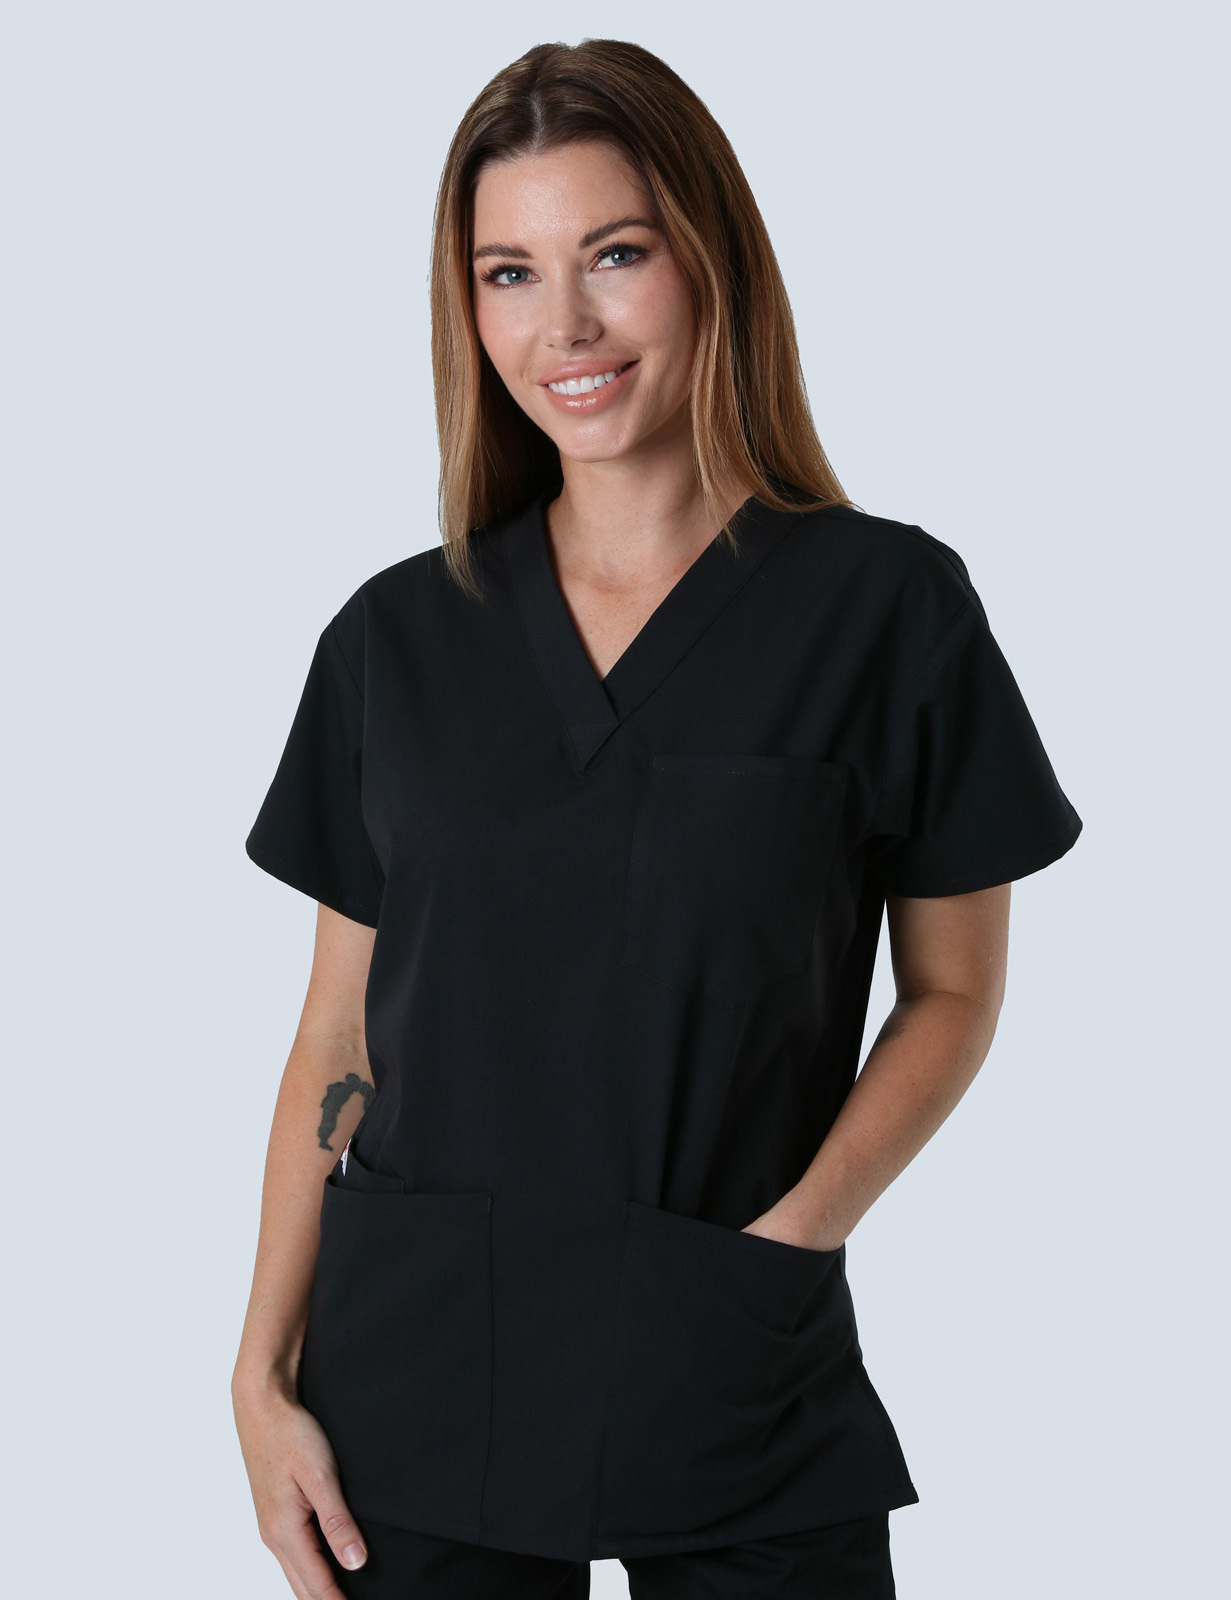 Holmesglen Private Hospital - ICC RN (4 Pocket Scrub Top and Cargo Pants in Black incl Logos)